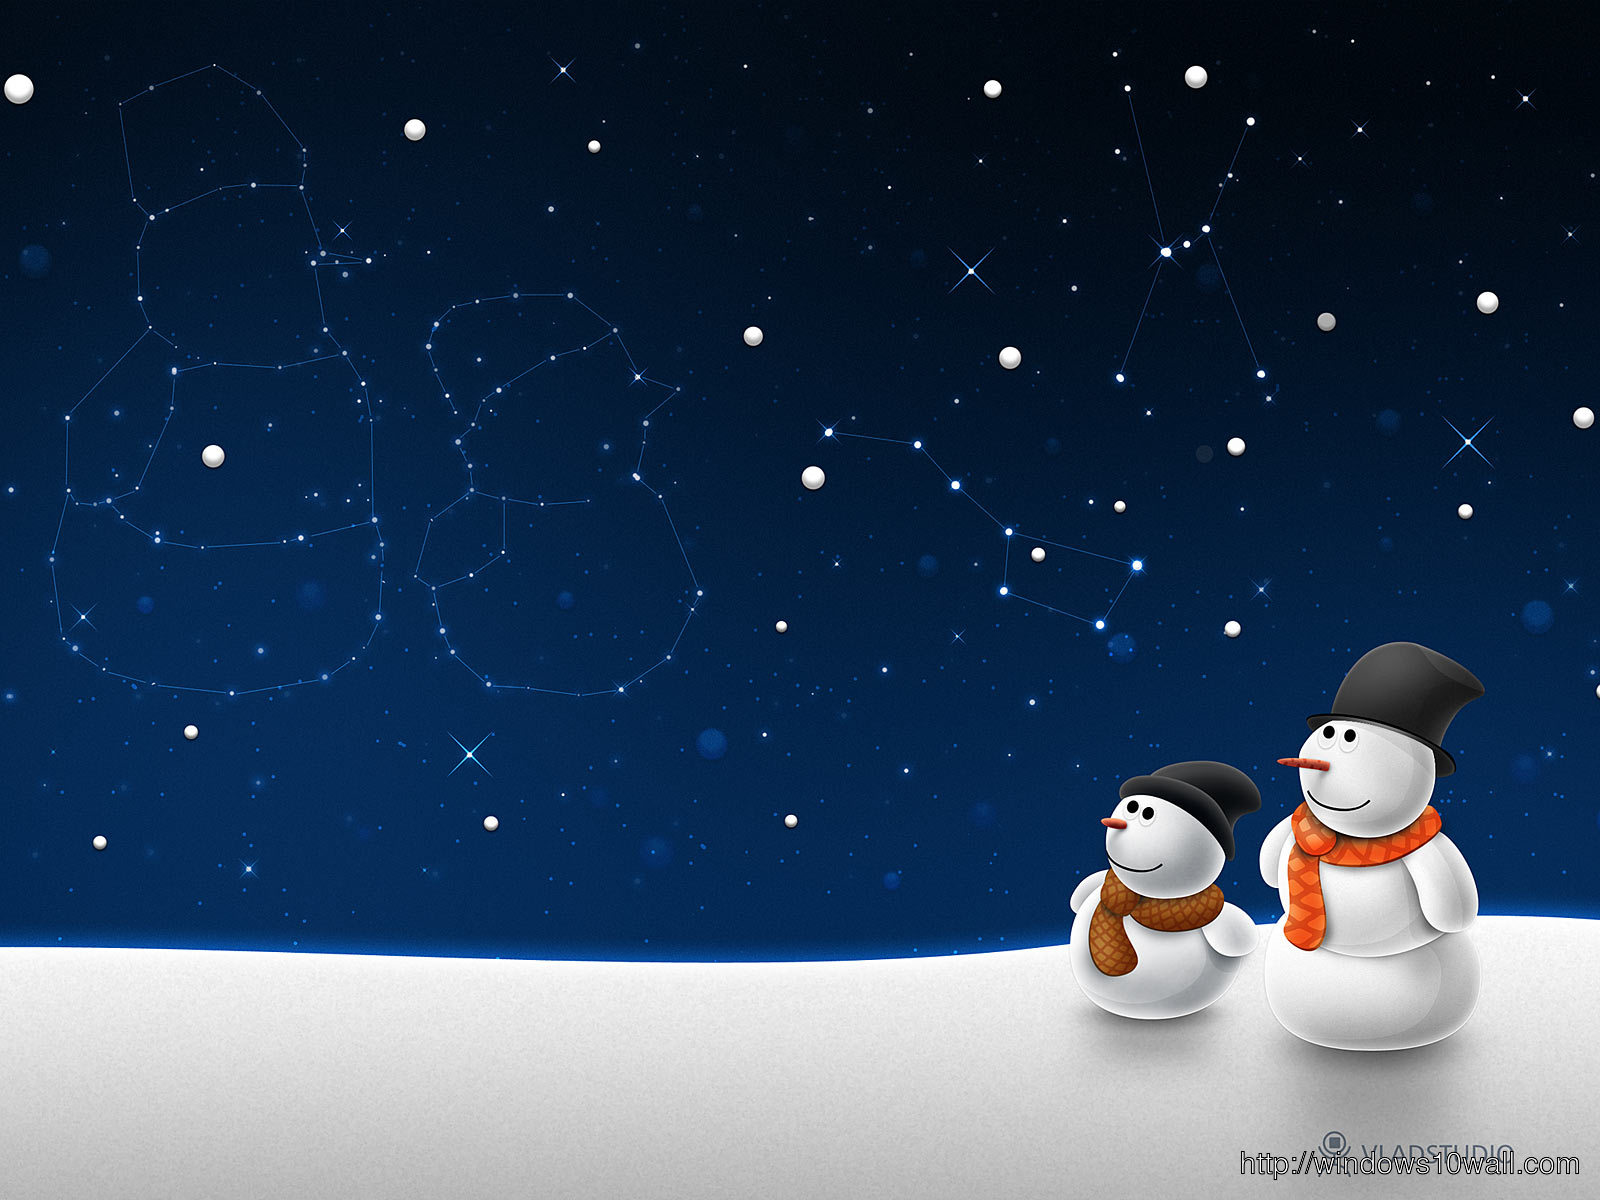 Snowman Holiday Background Wallpaper